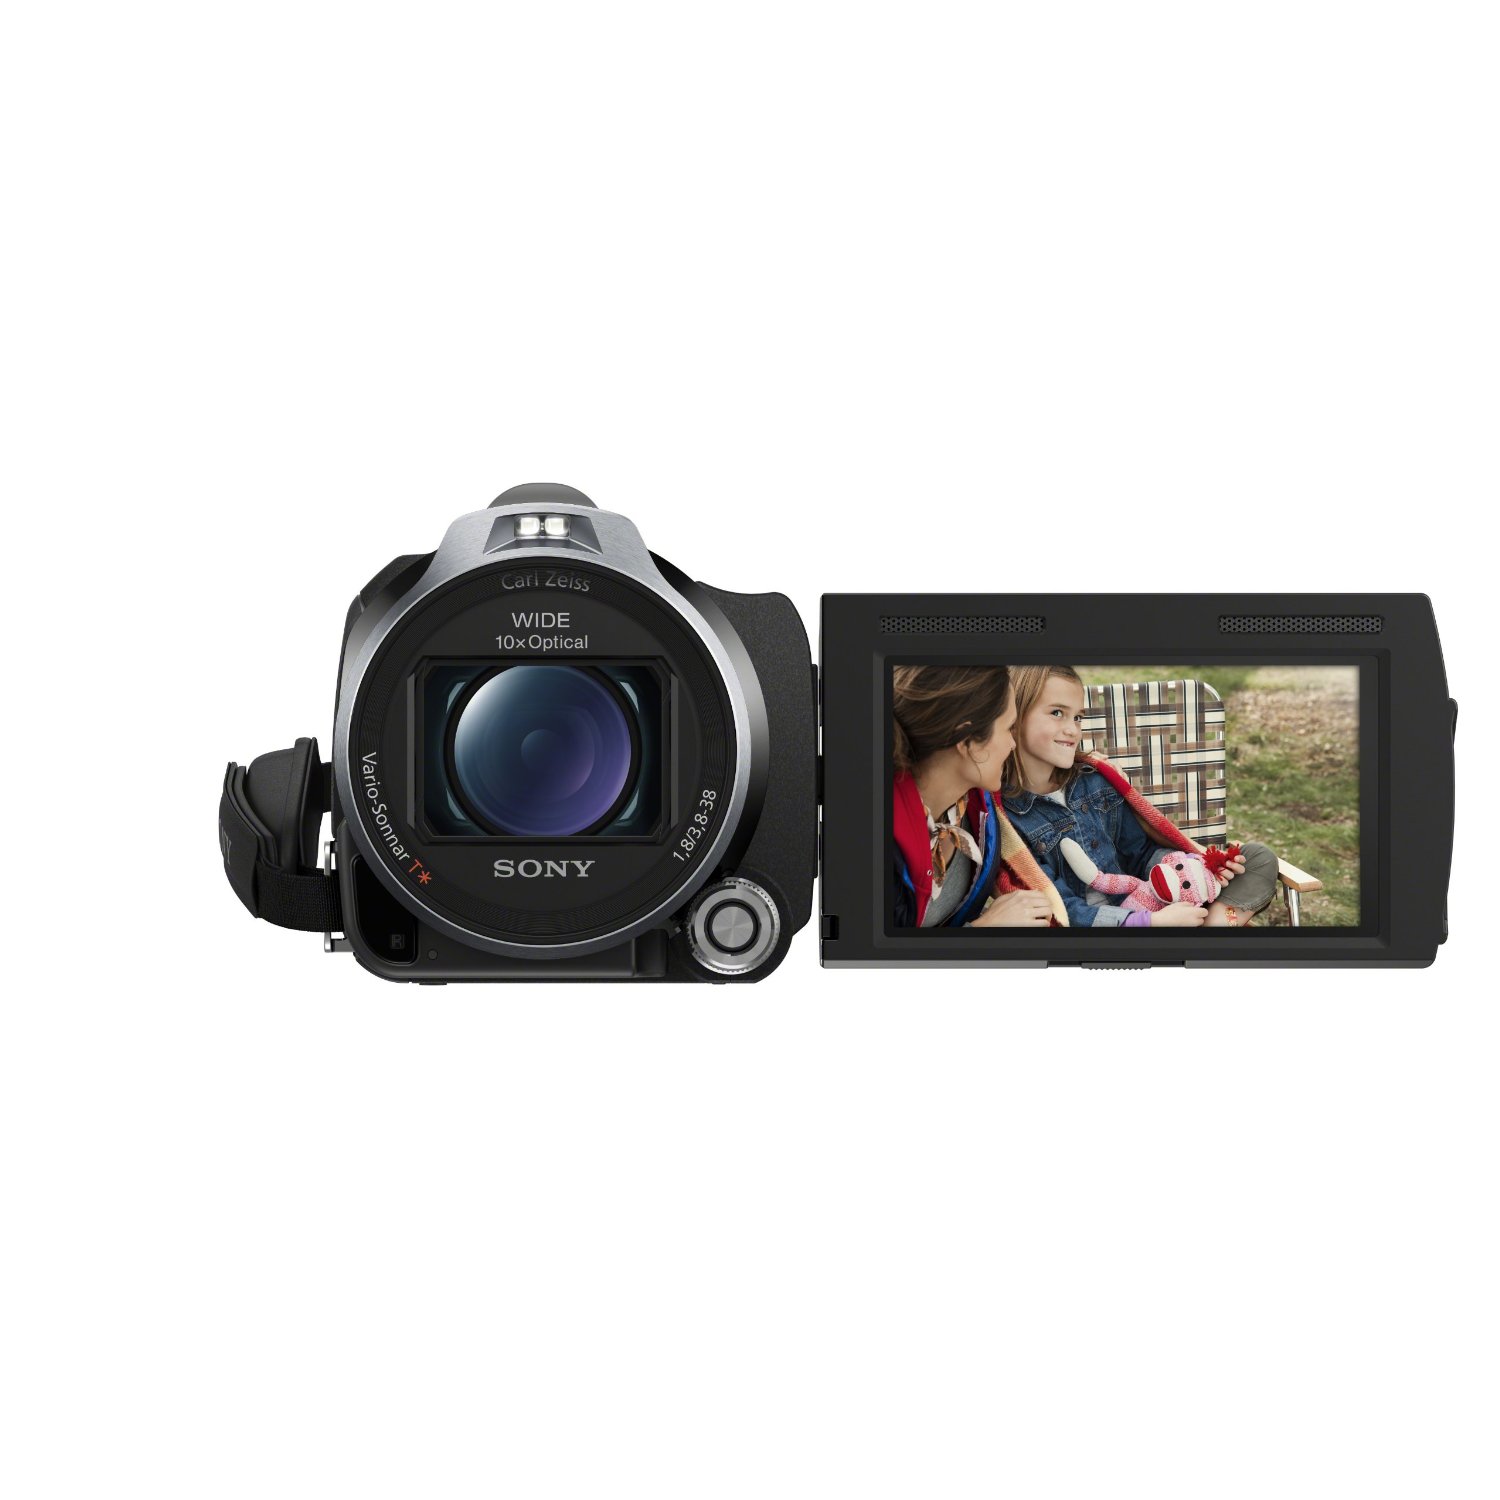 http://thetechjournal.com/wp-content/uploads/images/1201/1327336709-sony-hdrpj760v-241-mp-camcorder-high-definition-handycam-3.jpg